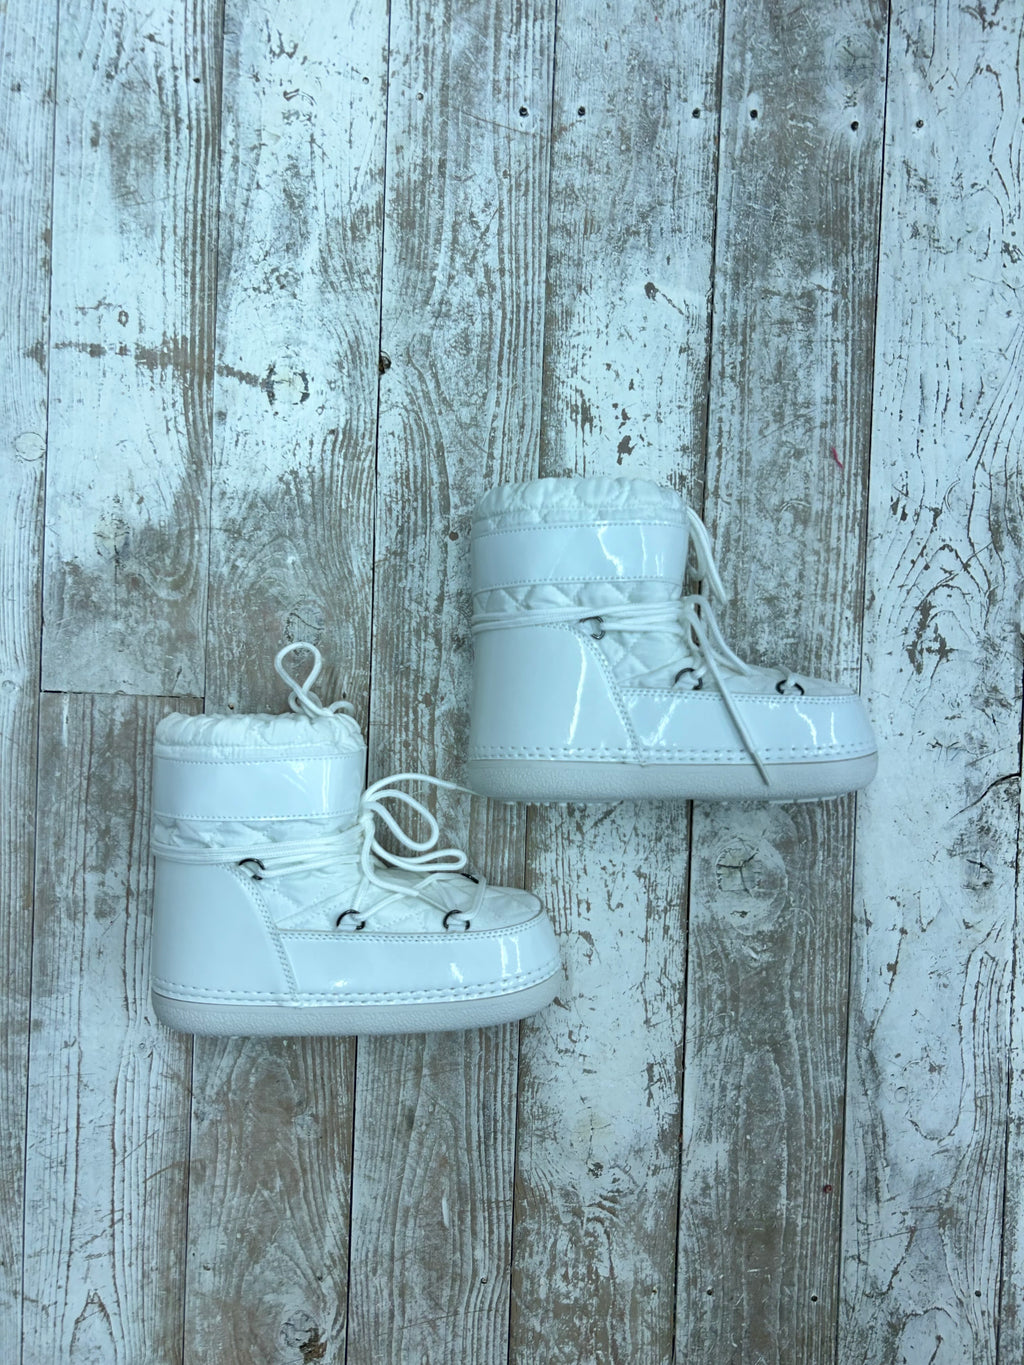 Luxury Limited Edition Short Snow Boots ‘Les 2 Alpes’ Royal Snow